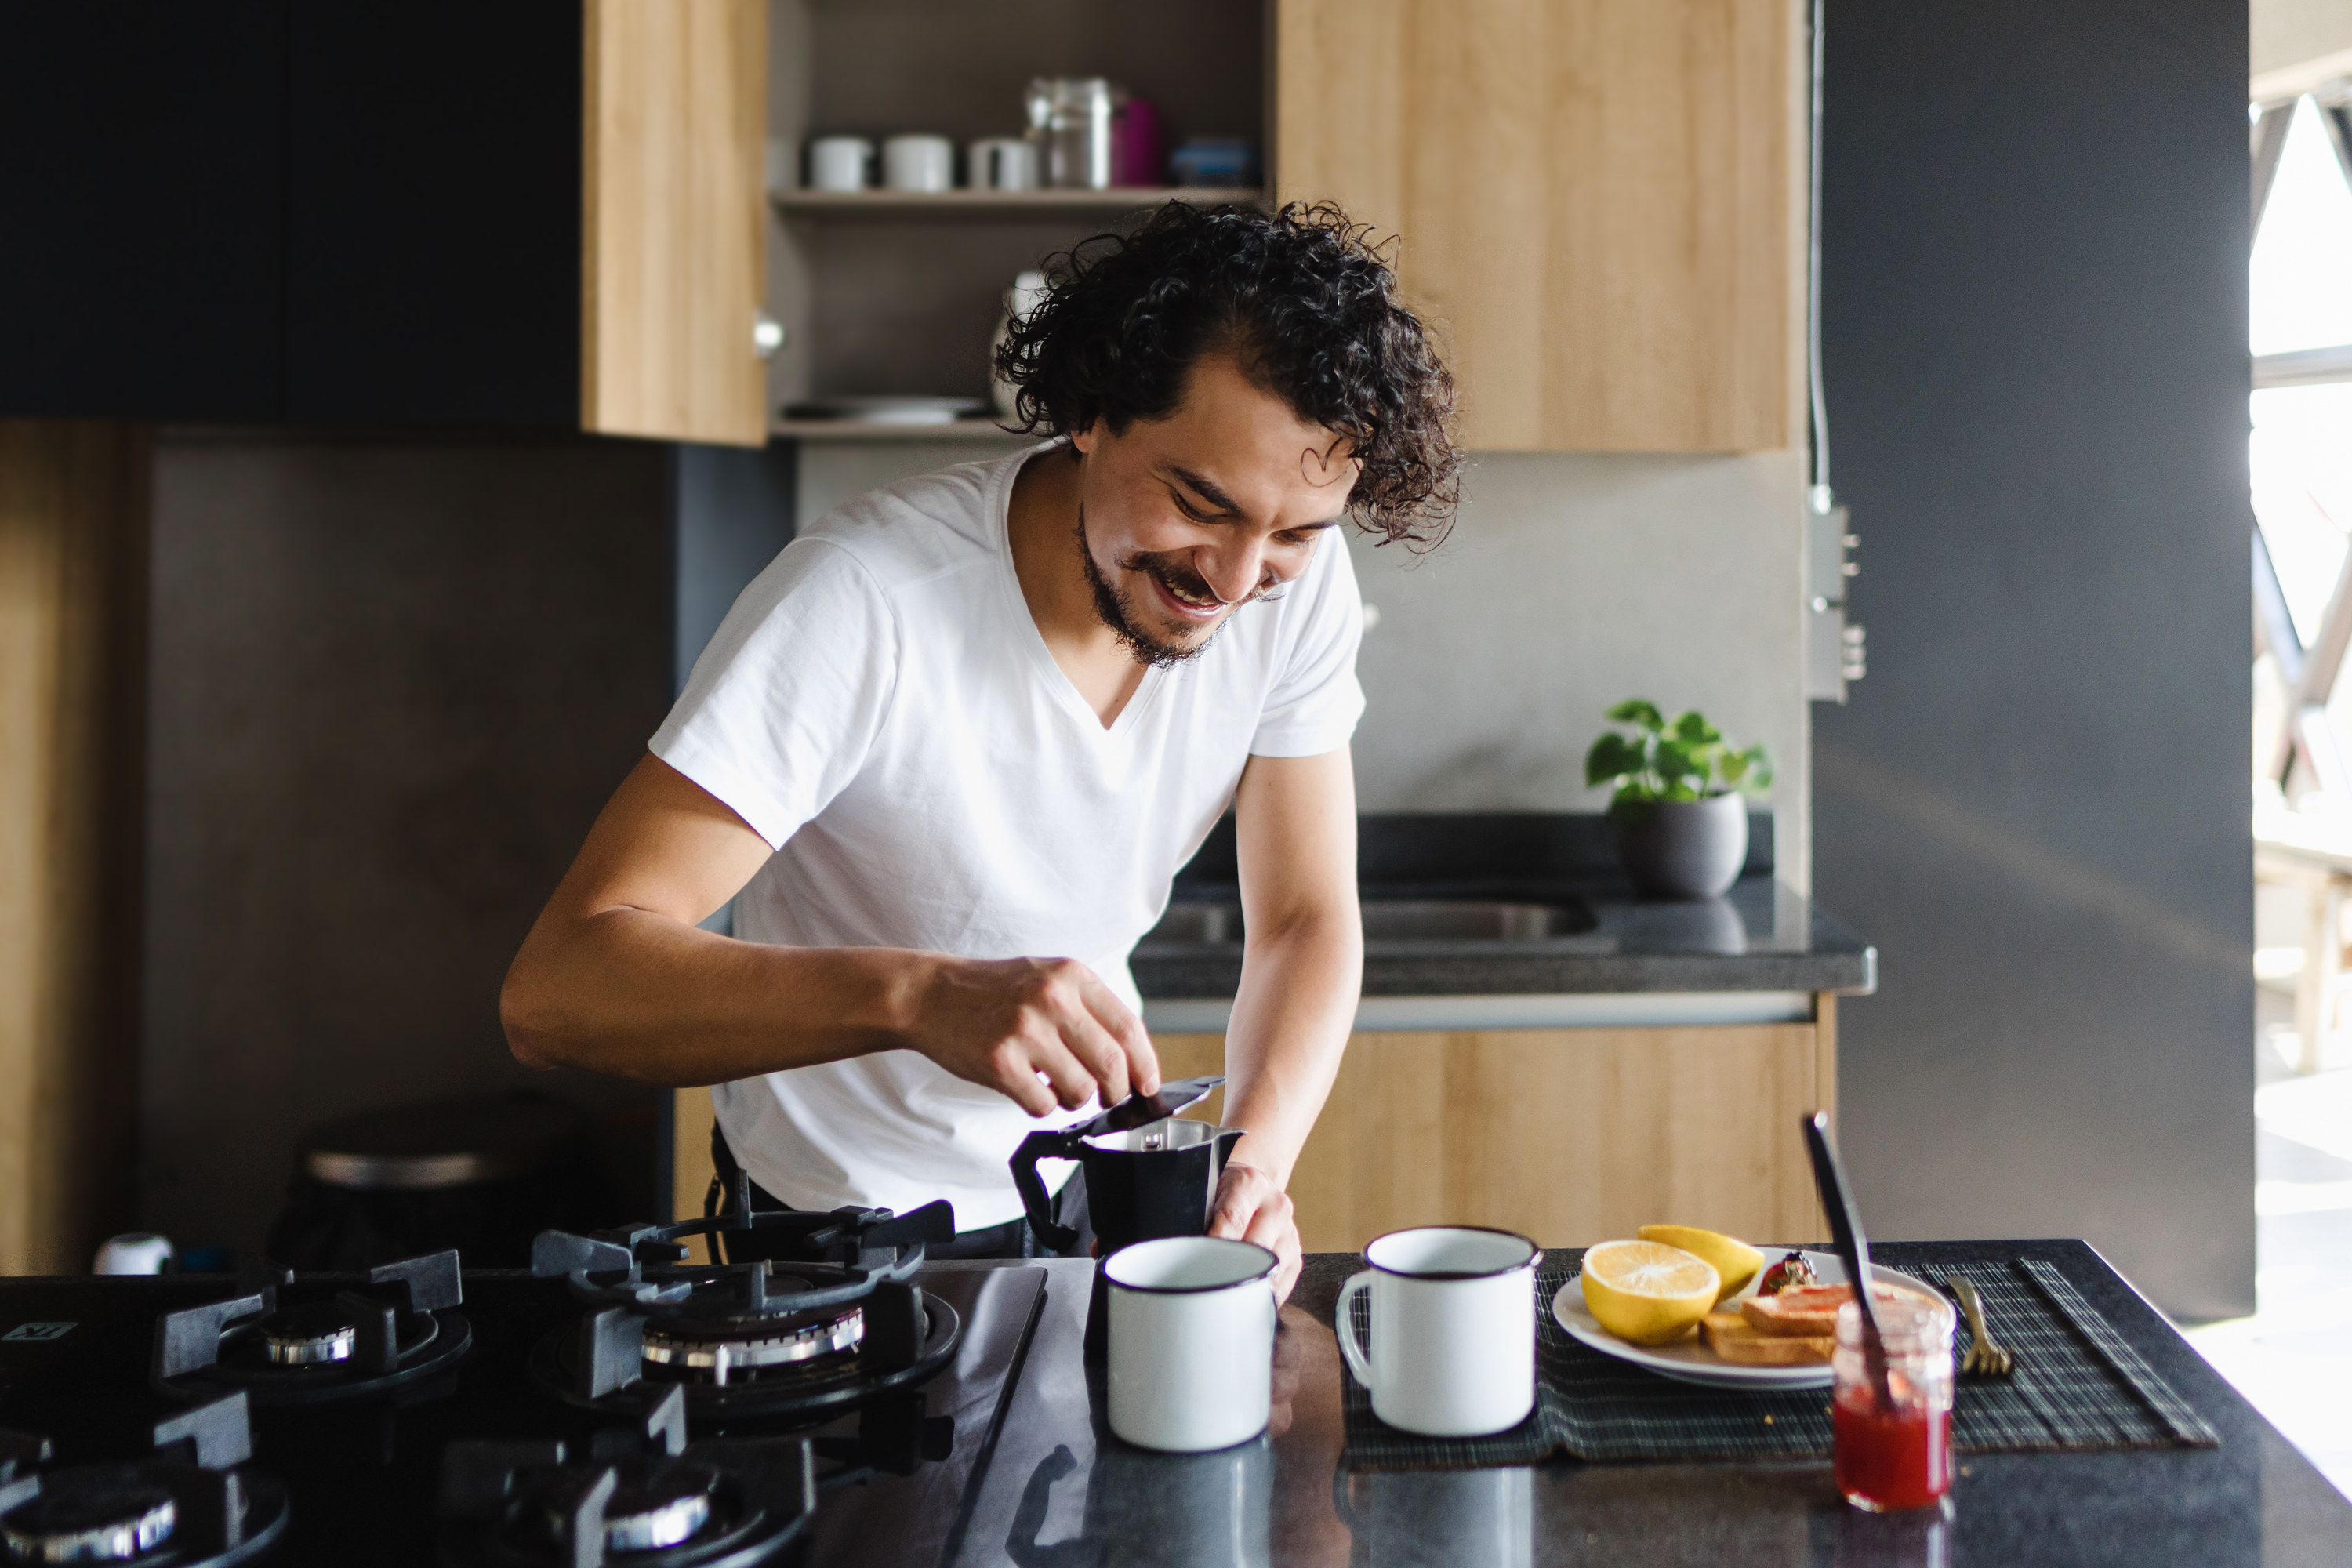 A man gets coffee ready with his breakfast in the kitchen